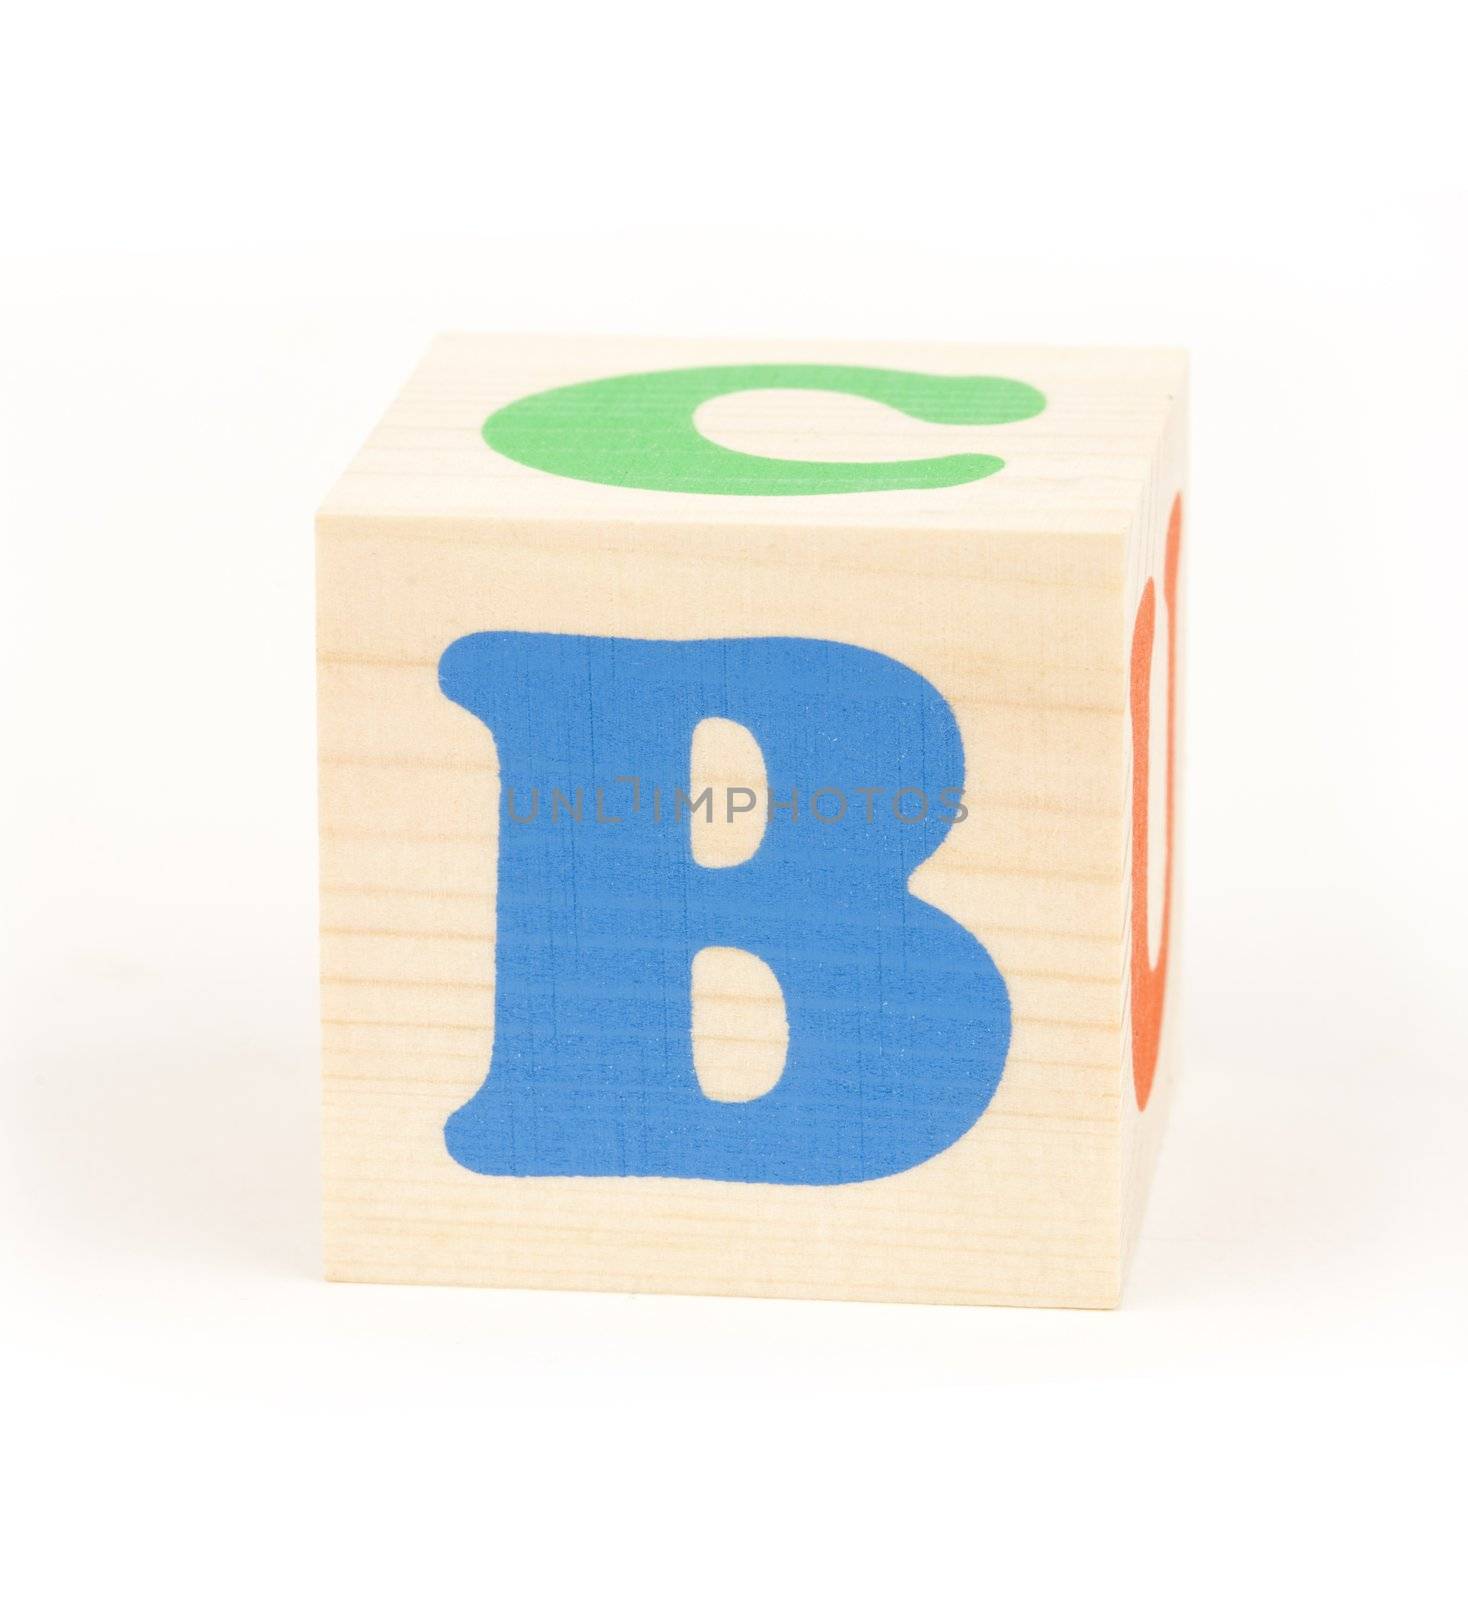 brick with letter "b", isolated on white background